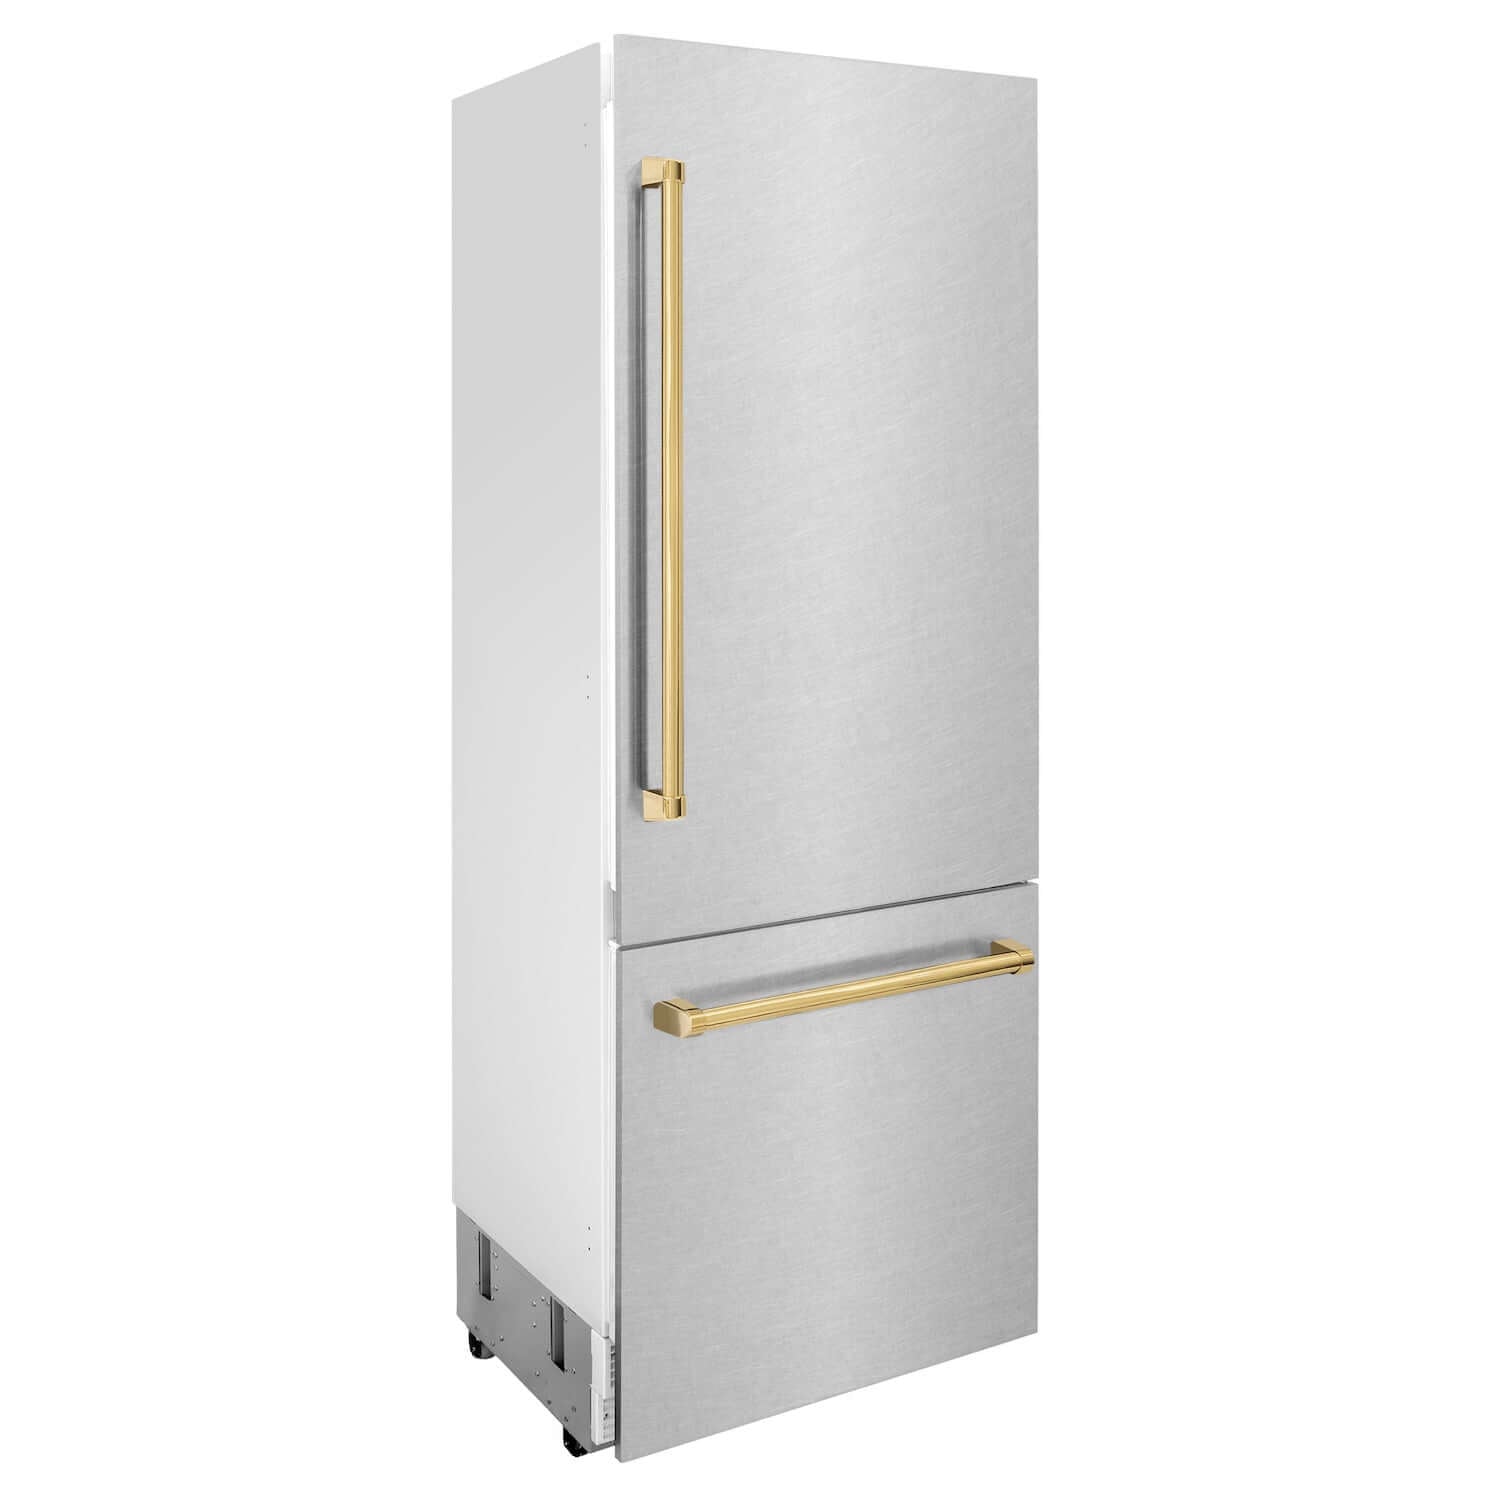 ZLINE Autograph Edition 30 in. 16.1 cu. ft. Built-in 2-Door Bottom Freezer Refrigerator with Internal Water and Ice Dispenser in Fingerprint Resistant Stainless Steel with Polished Gold Accents (RBIVZ-SN-30-G) side, closed.